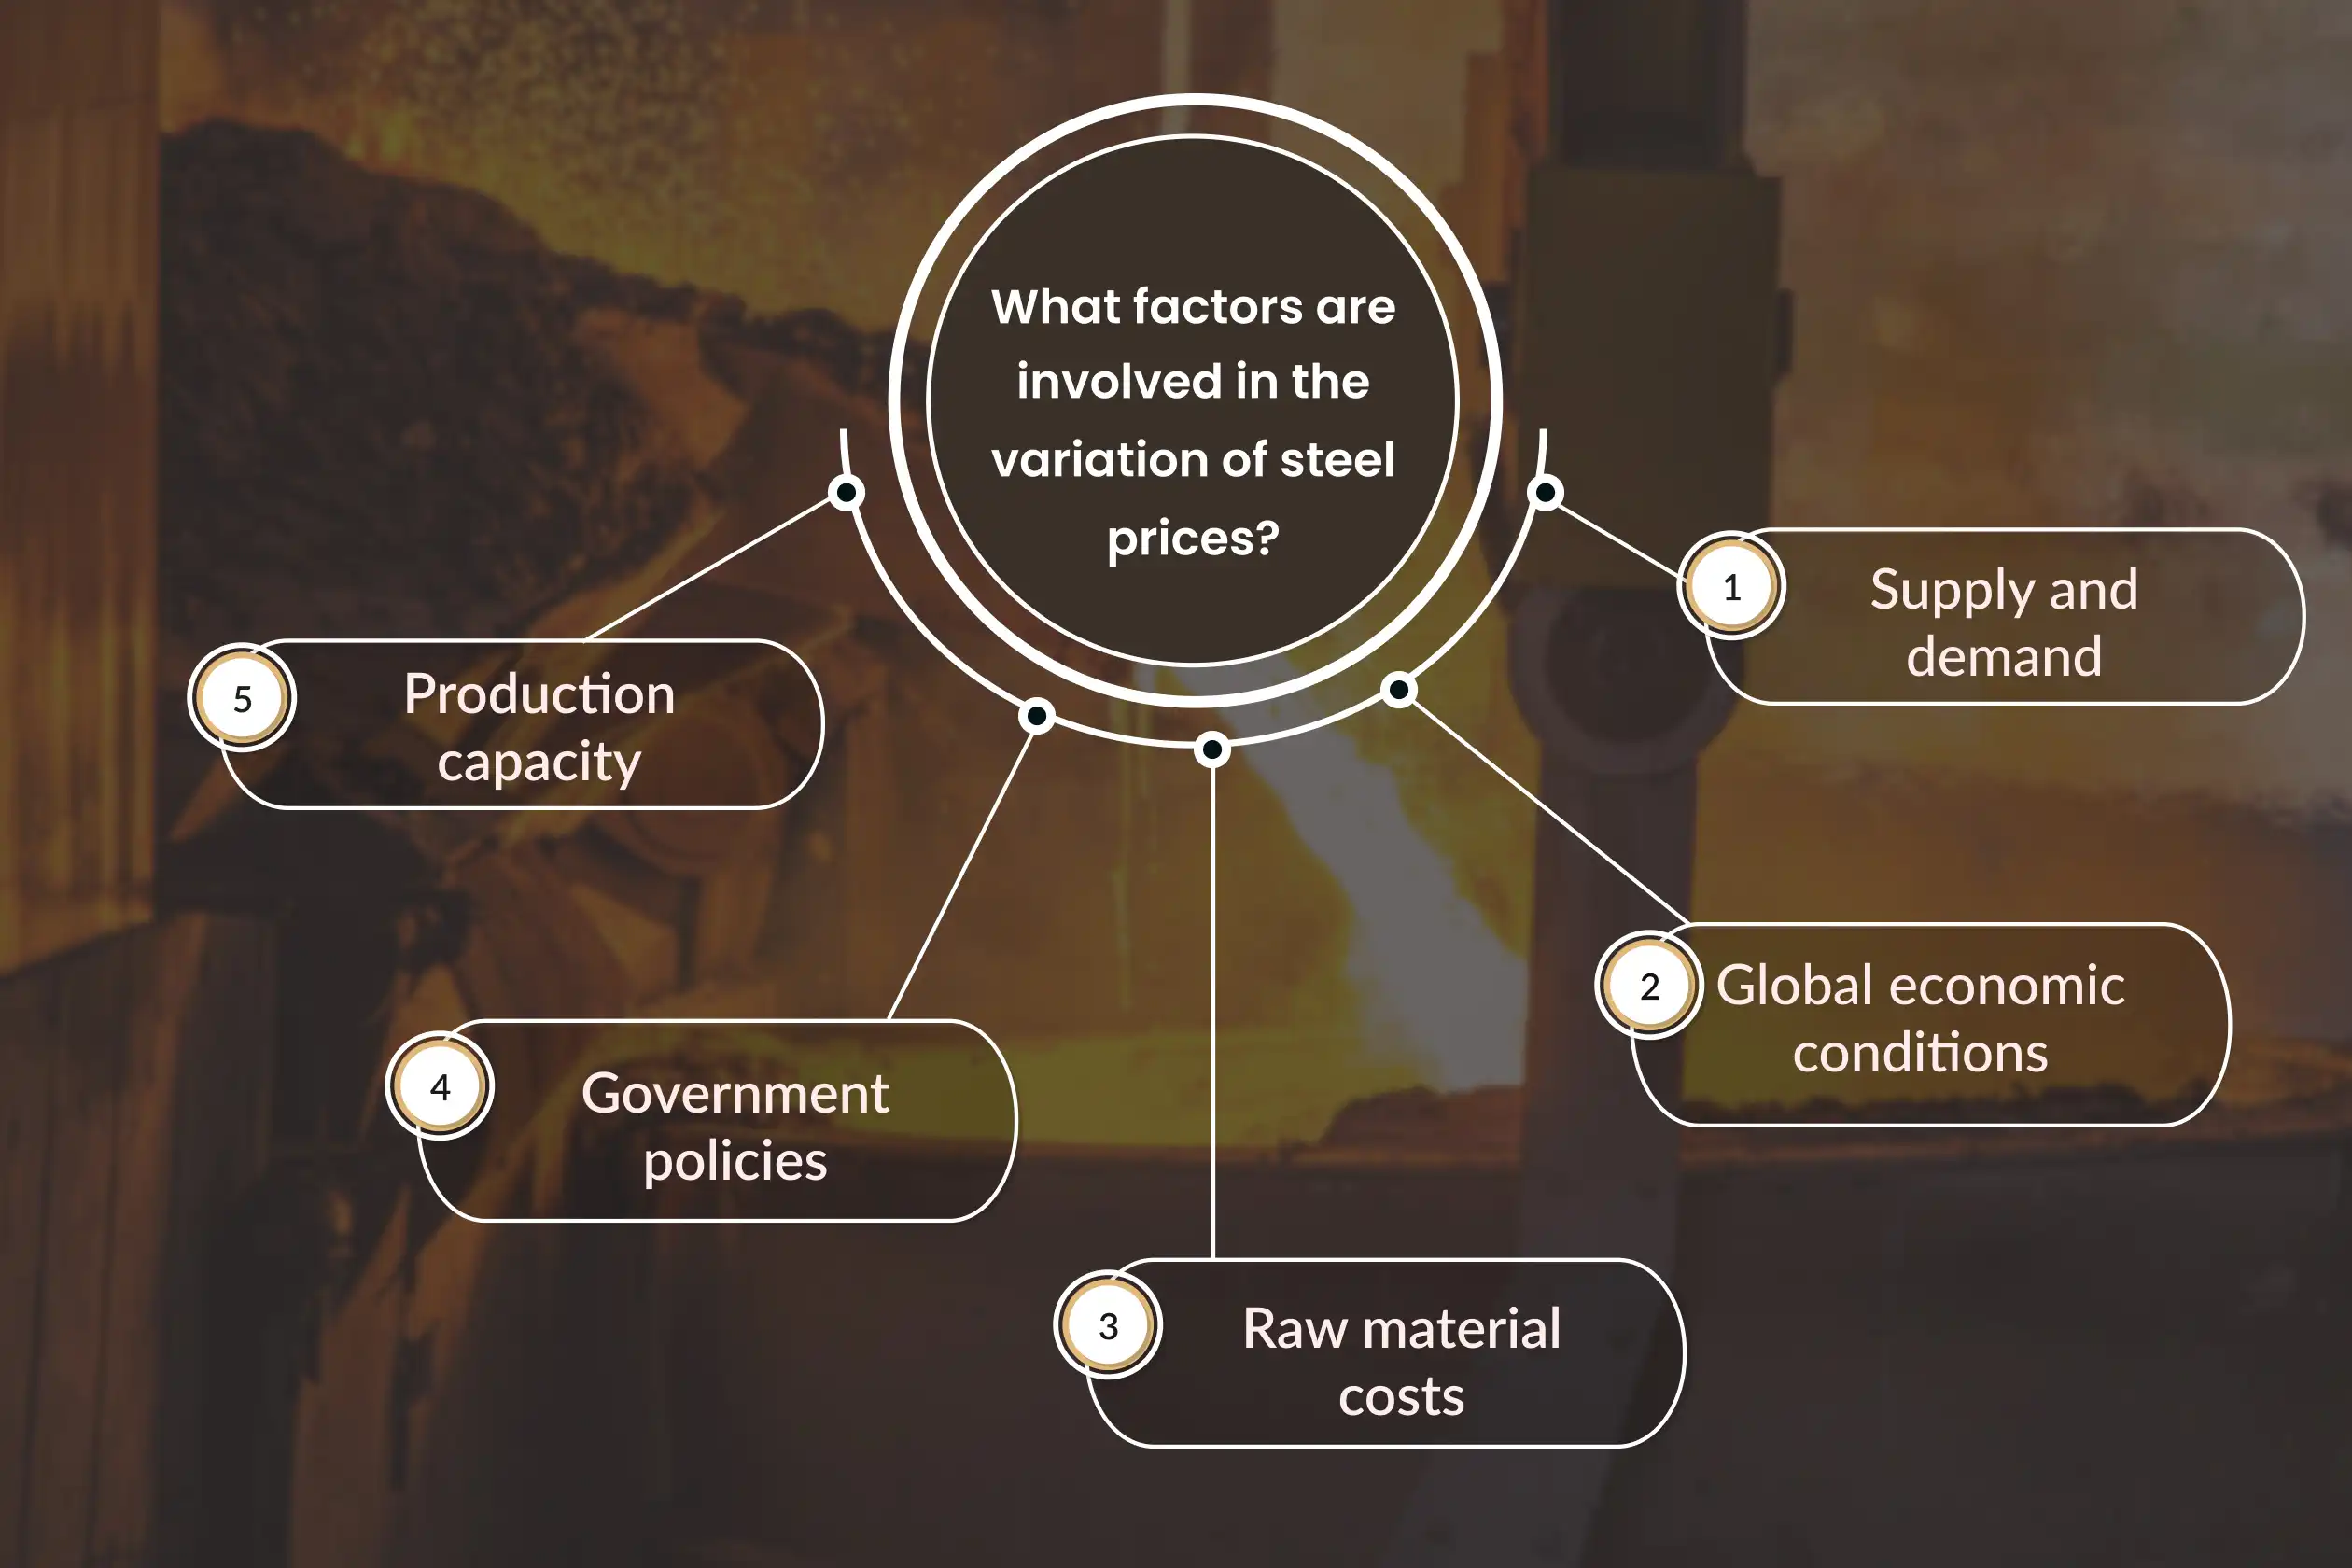 What factors are involved in the variation of steel prices